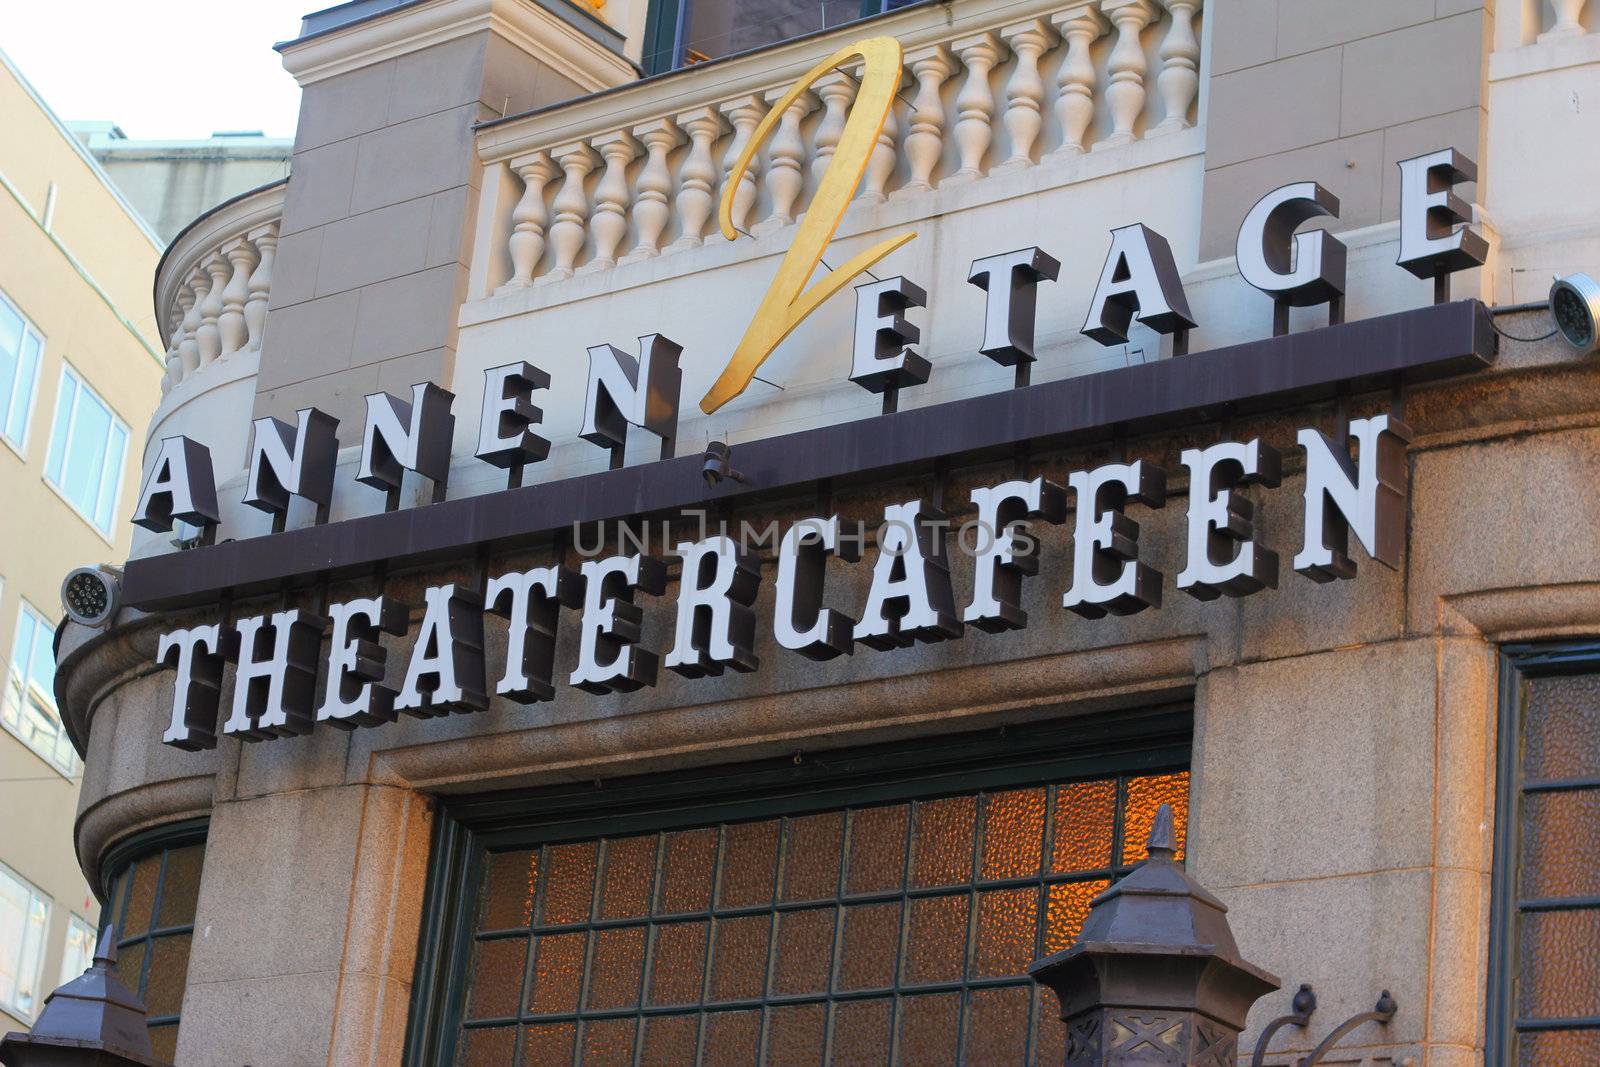 The Theatre Café (Norwegian: Theatercafeen), opened in 1900, is one of Oslos most popular restaurants. It's located next to the norwegian National Theatre.